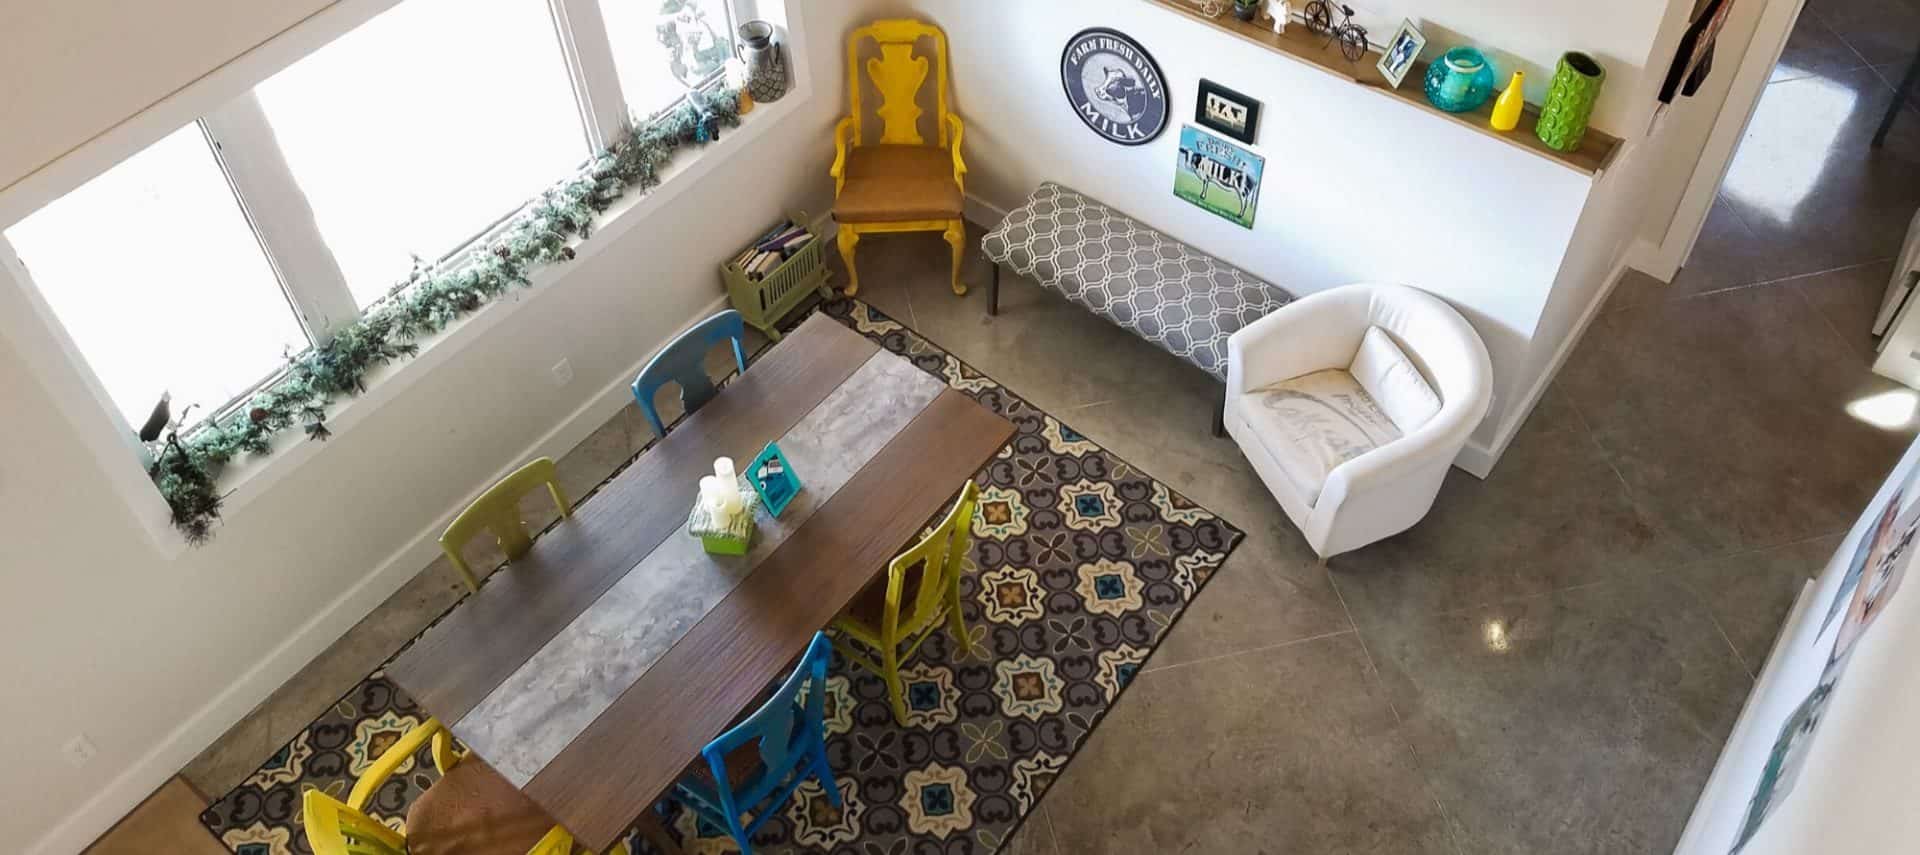 View of a dining area and sitting area from up high with large wooden table, blue and yellow chairs, large coordinating area rug, and upholstered bench and chair